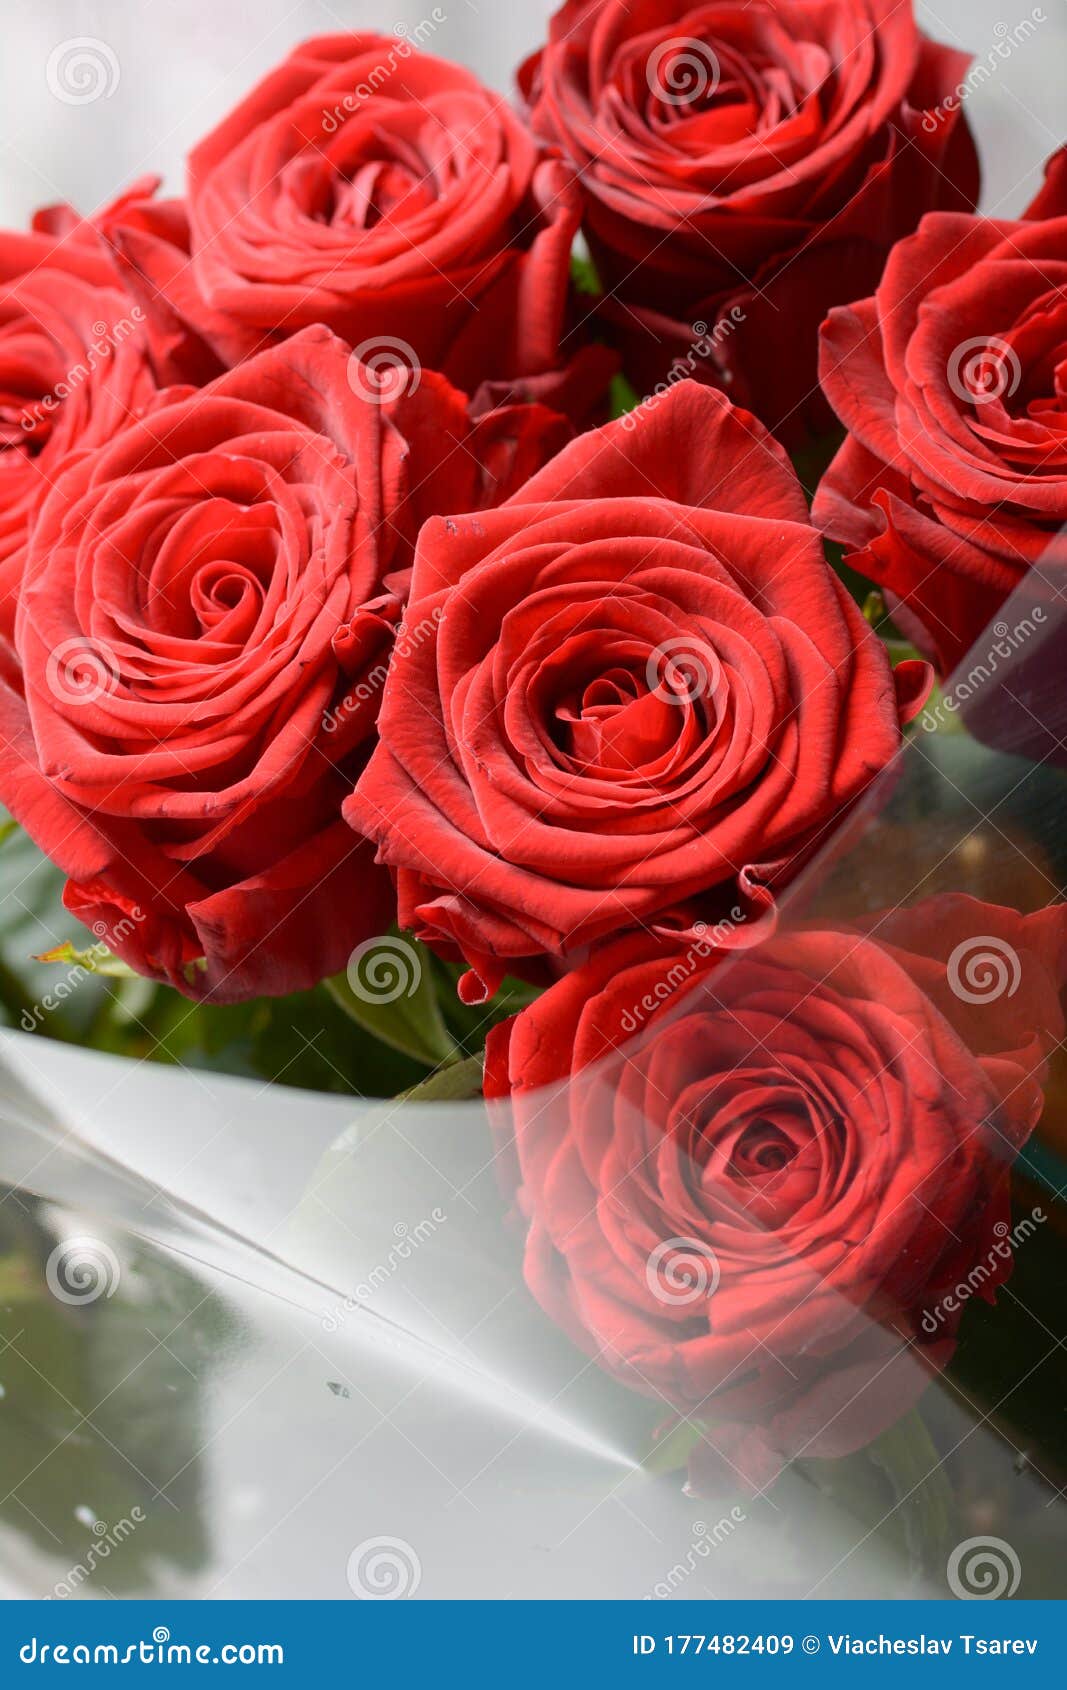 A Bouquet of Beautiful Burgundy Roses Close-up. Stock Image - Image of ...